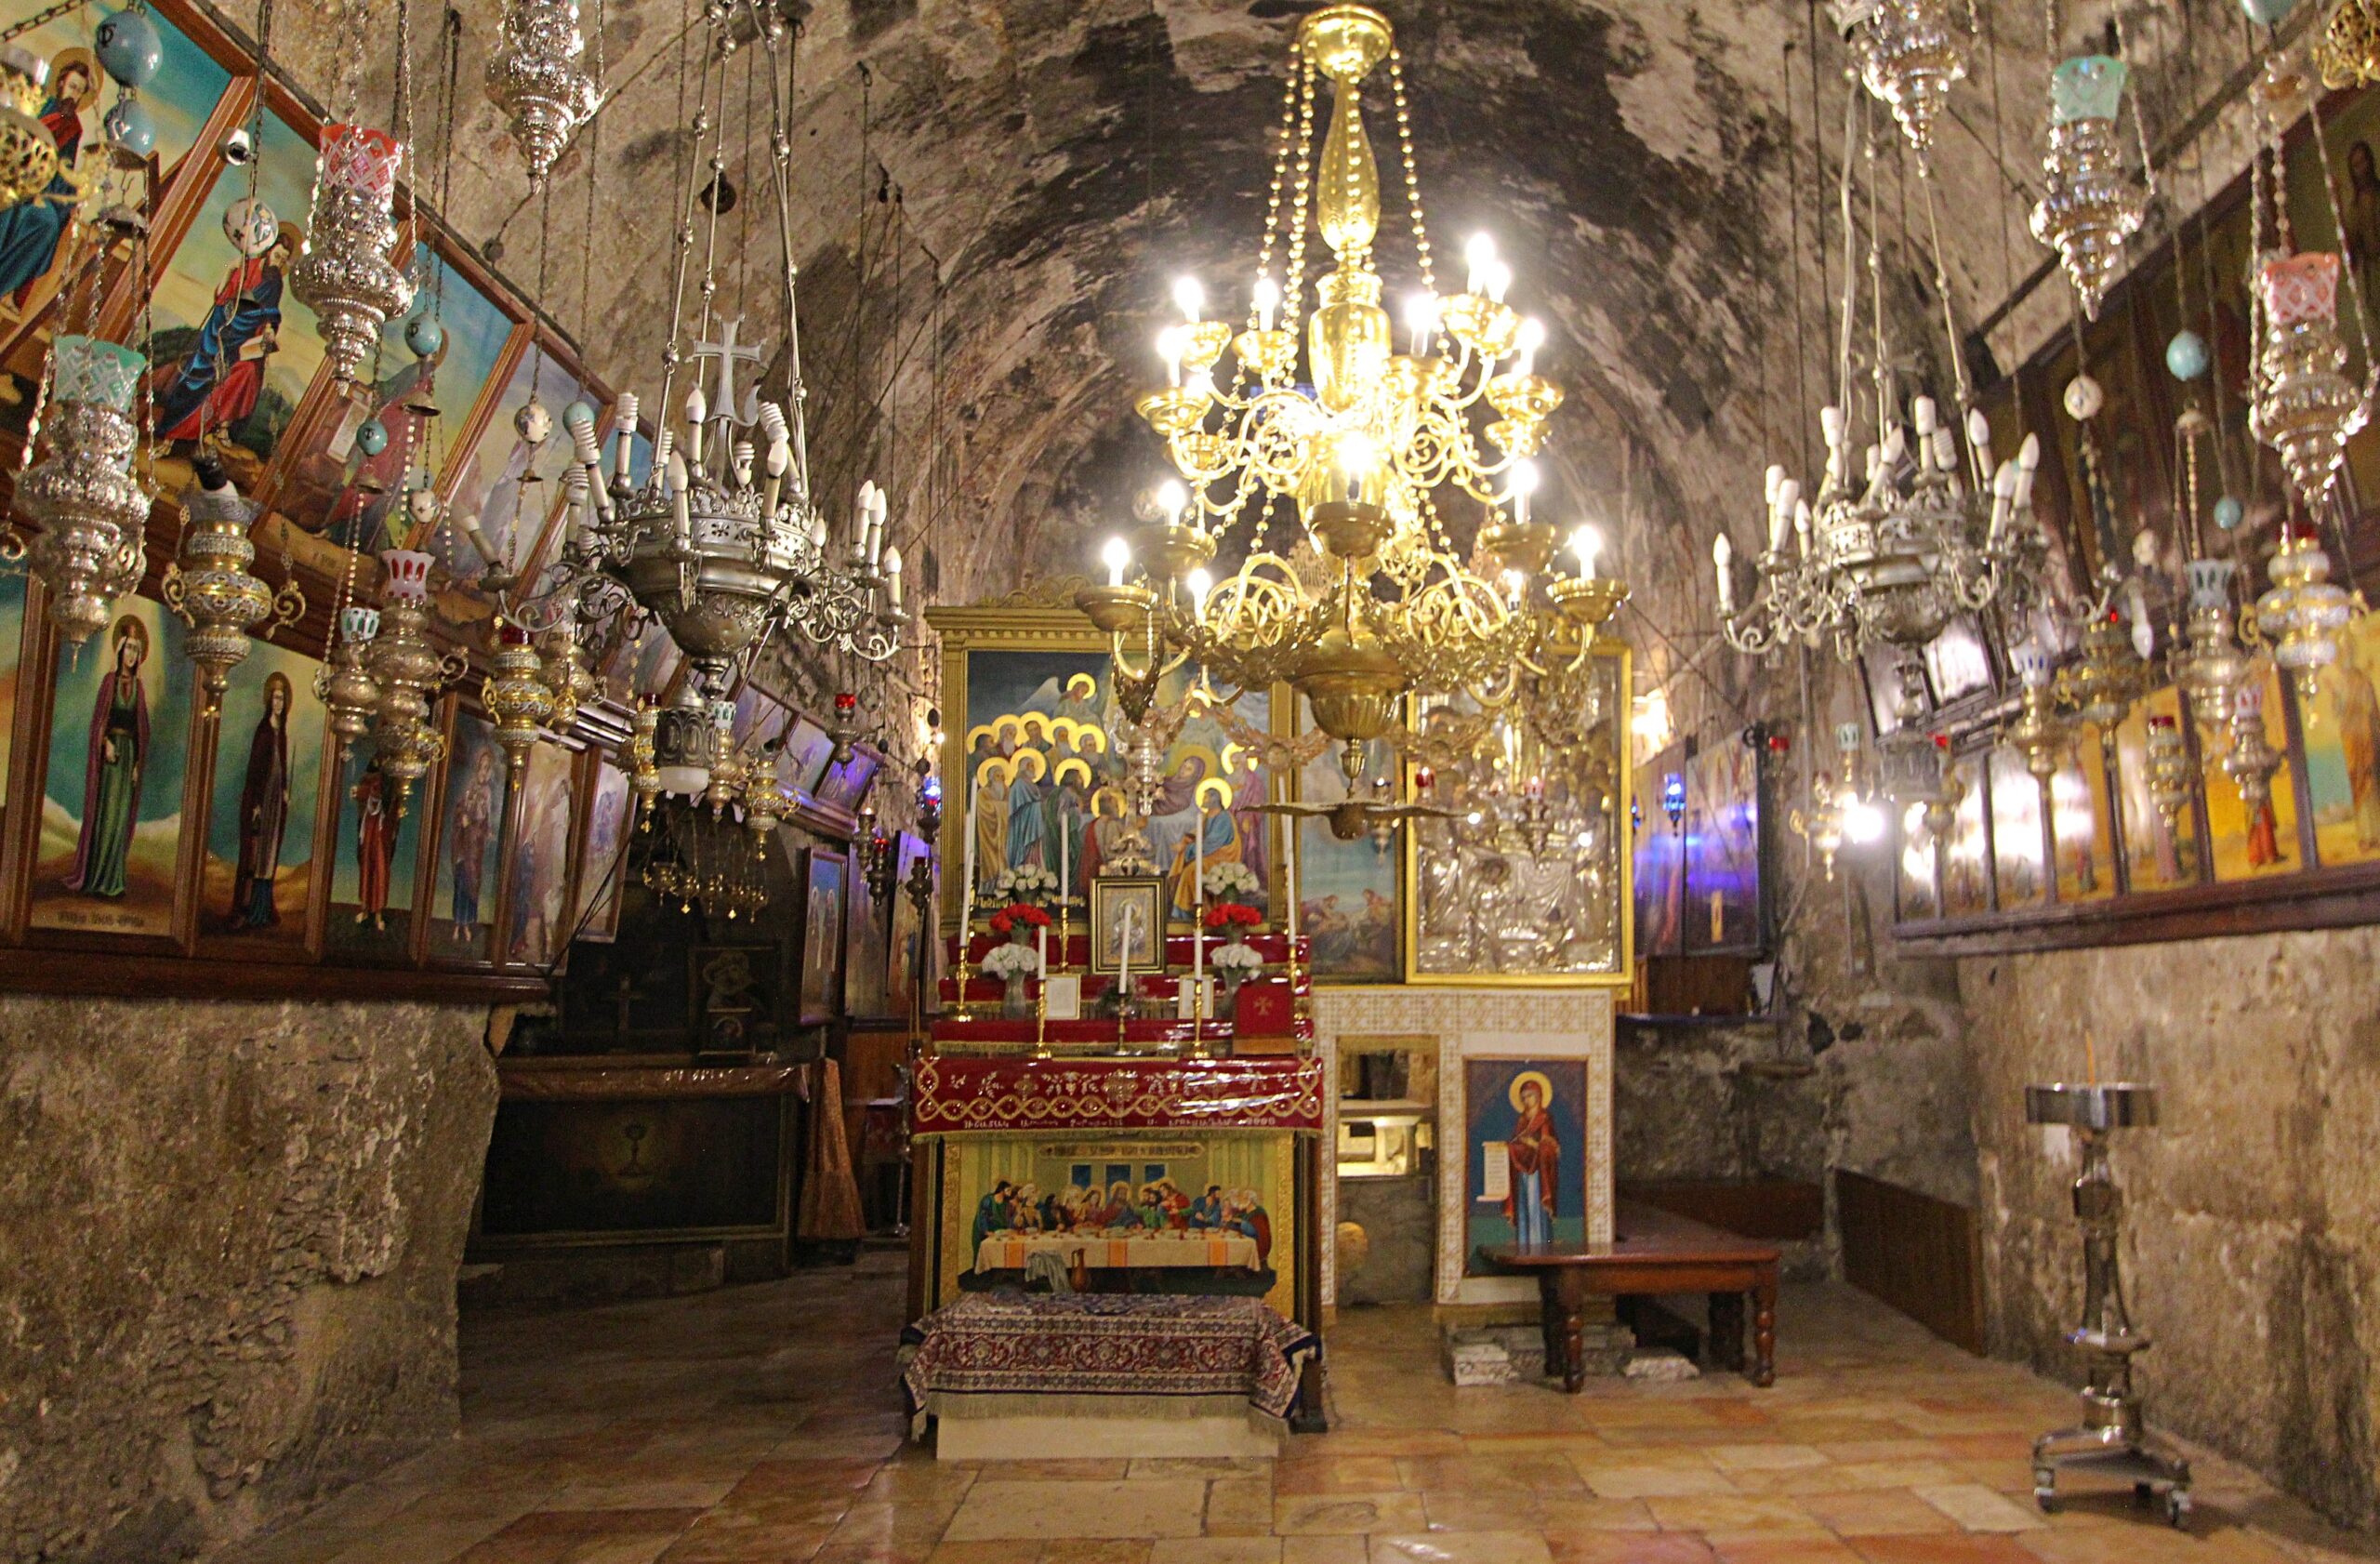 The Tombs of the Virgin Mary